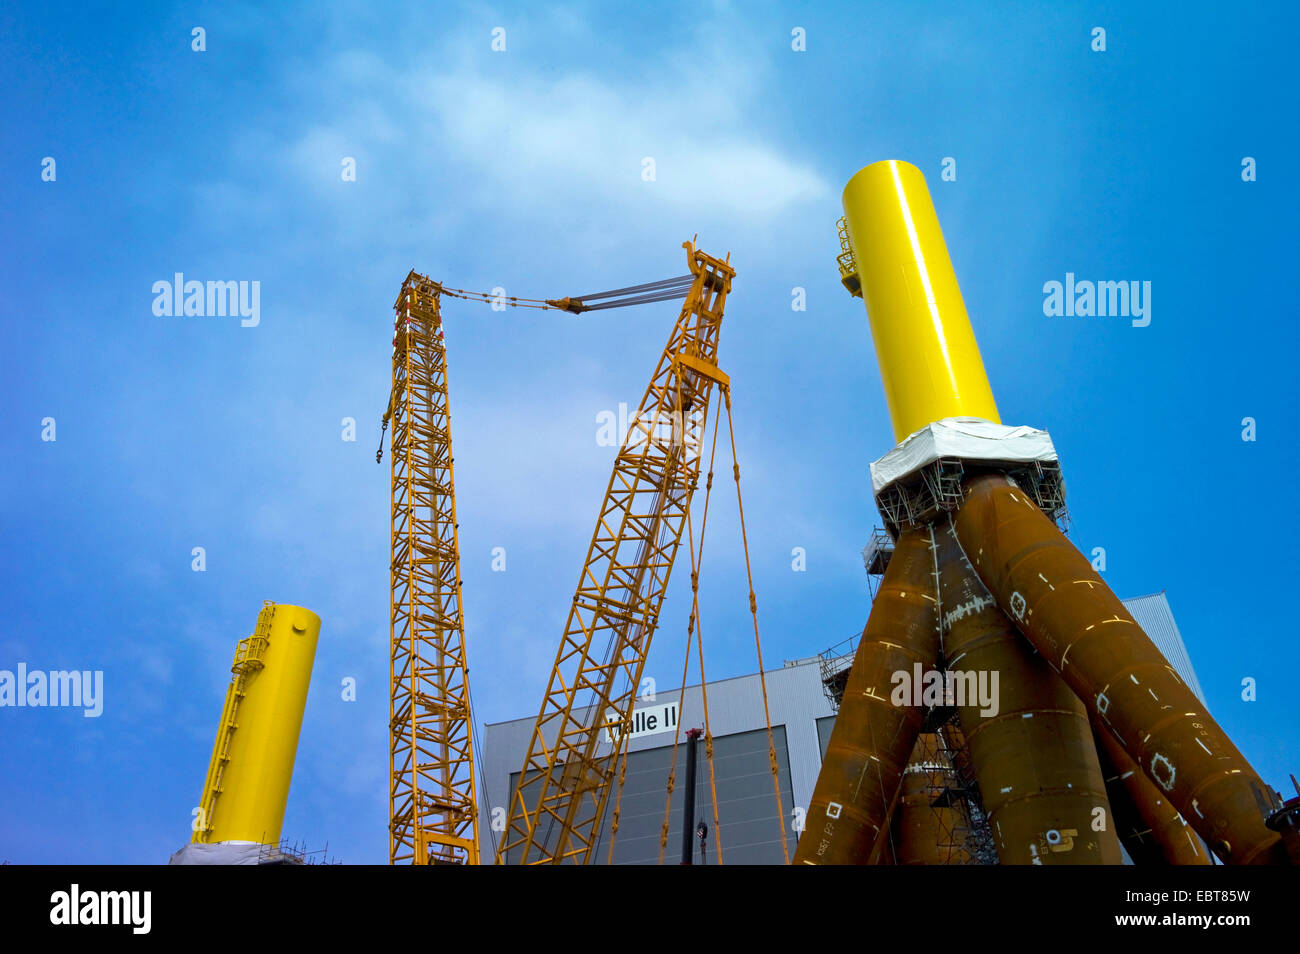 tripods for offshore wind farms in harbour, Germany, Labradorhafen, Bremerhaven Stock Photo